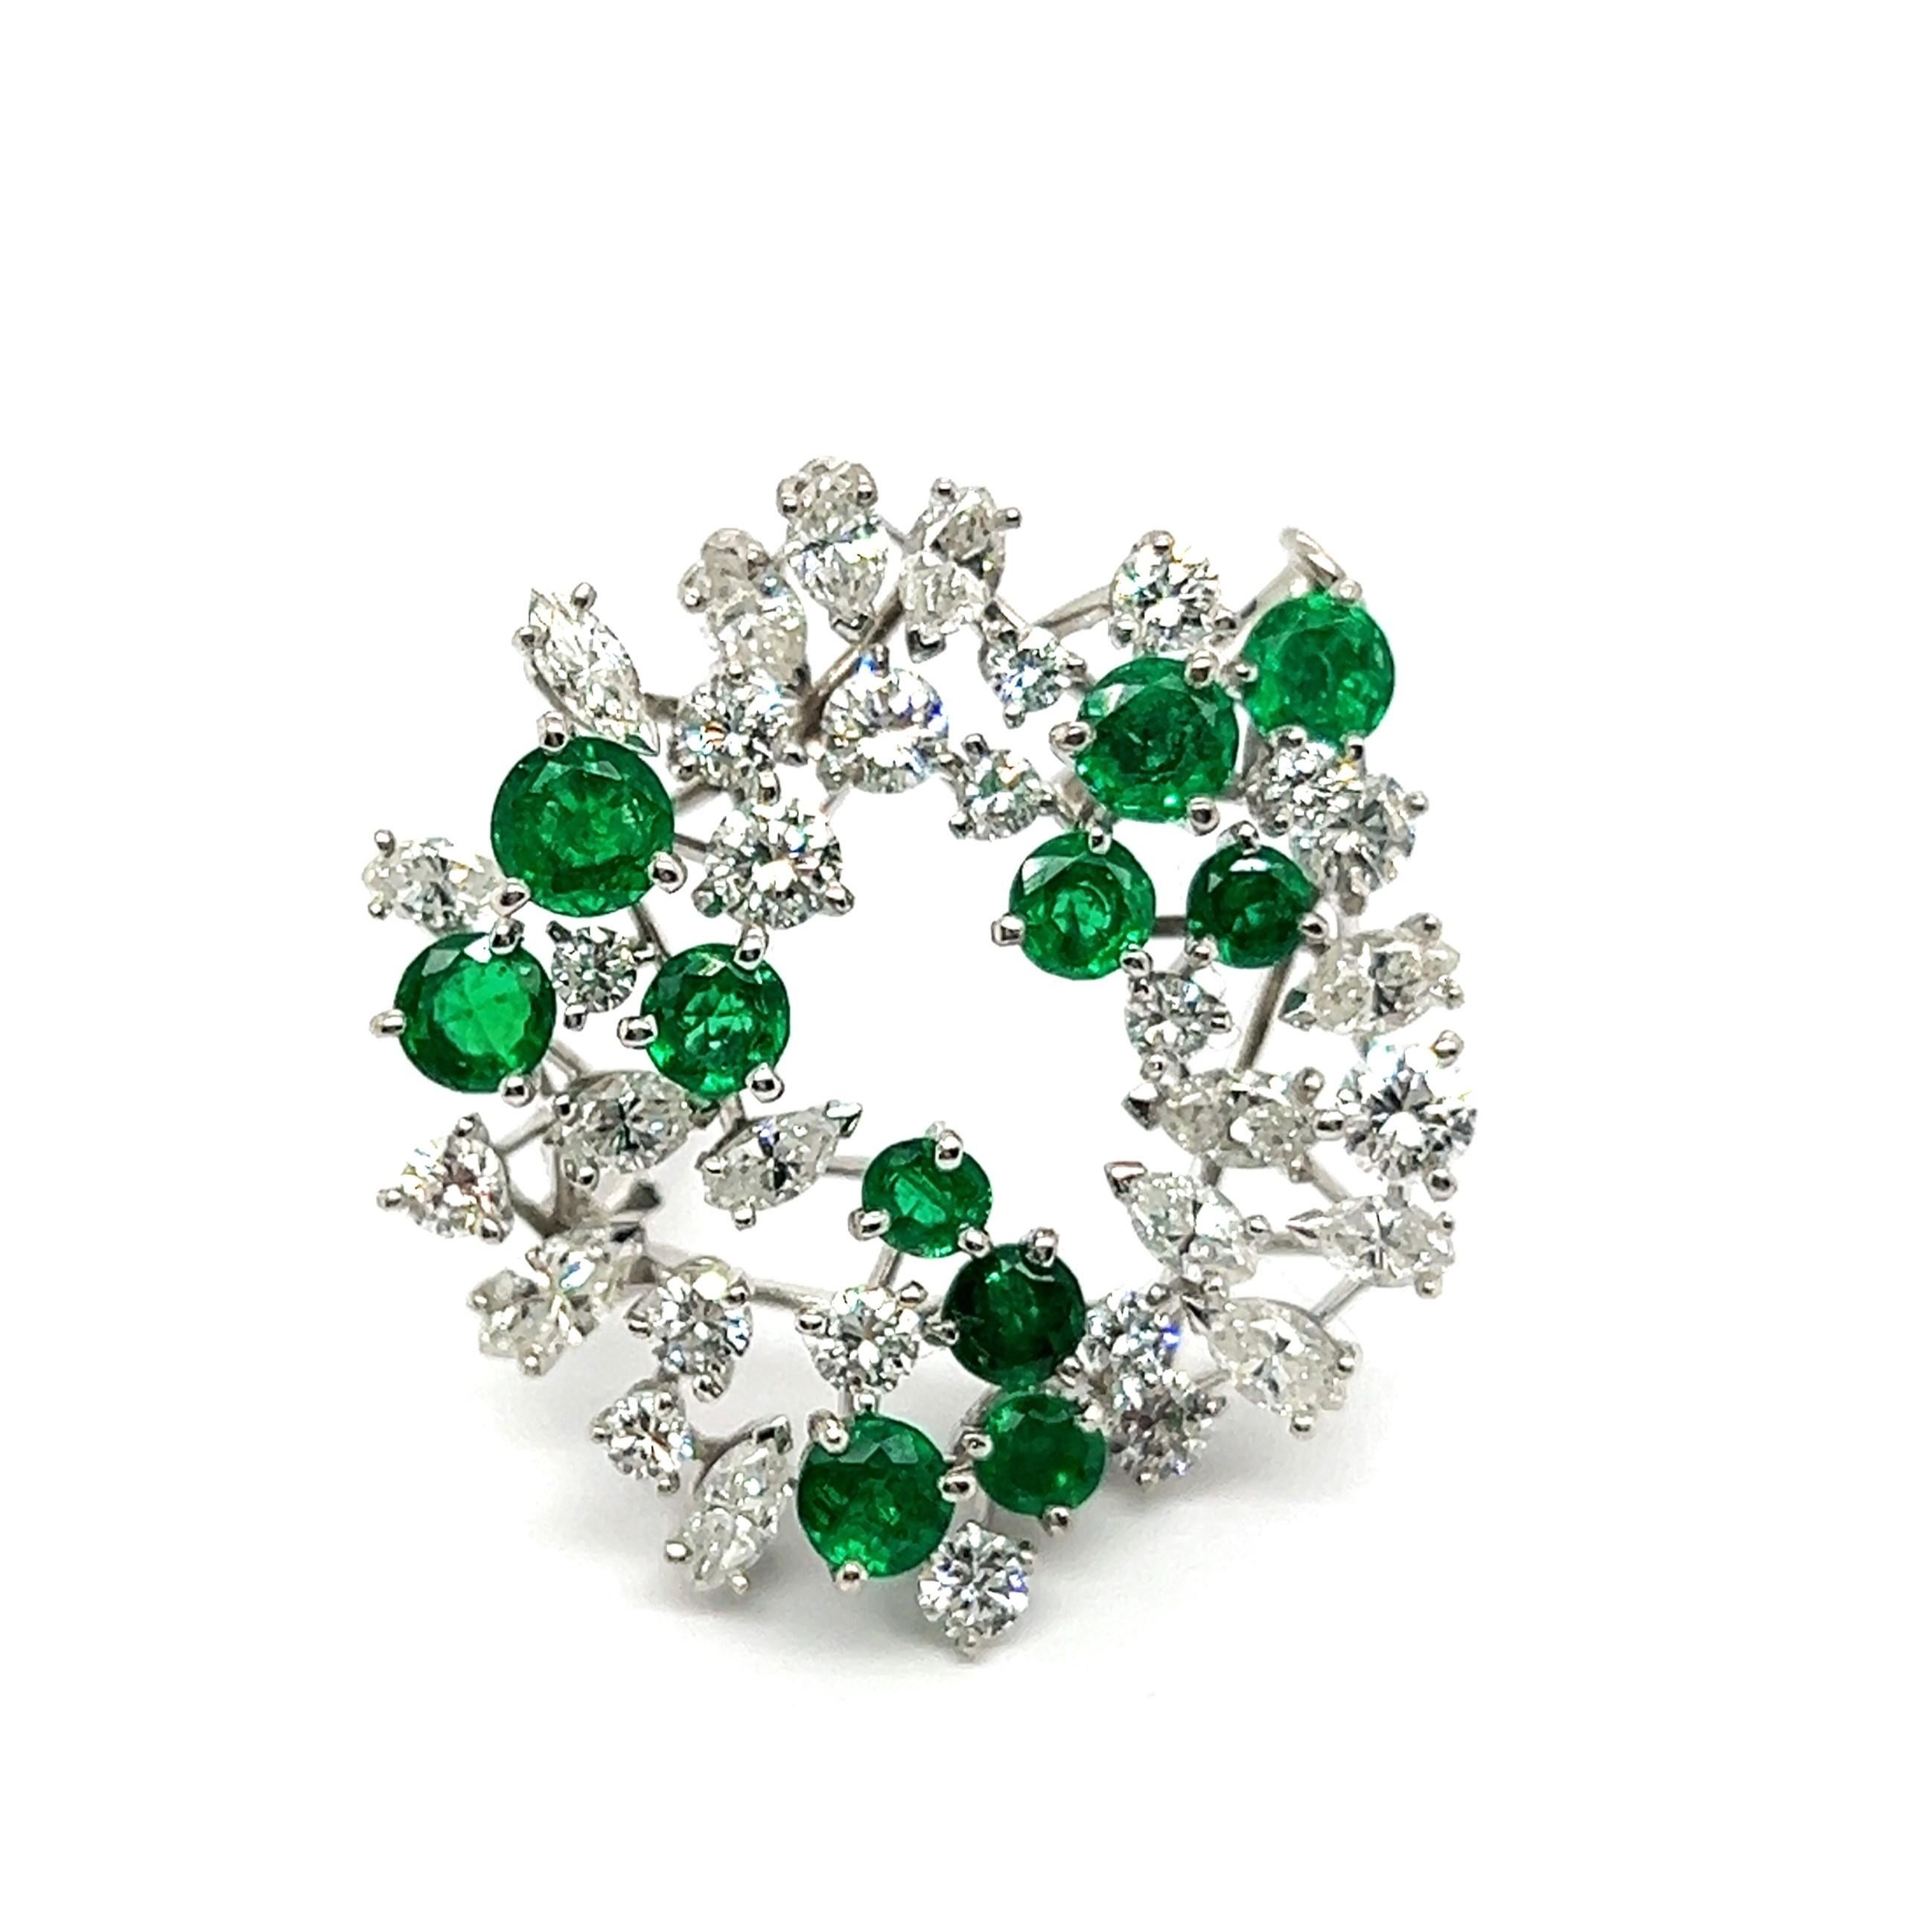 Modern Brooch with Emeralds & Diamonds in 18 Karat White Gold by Meister For Sale